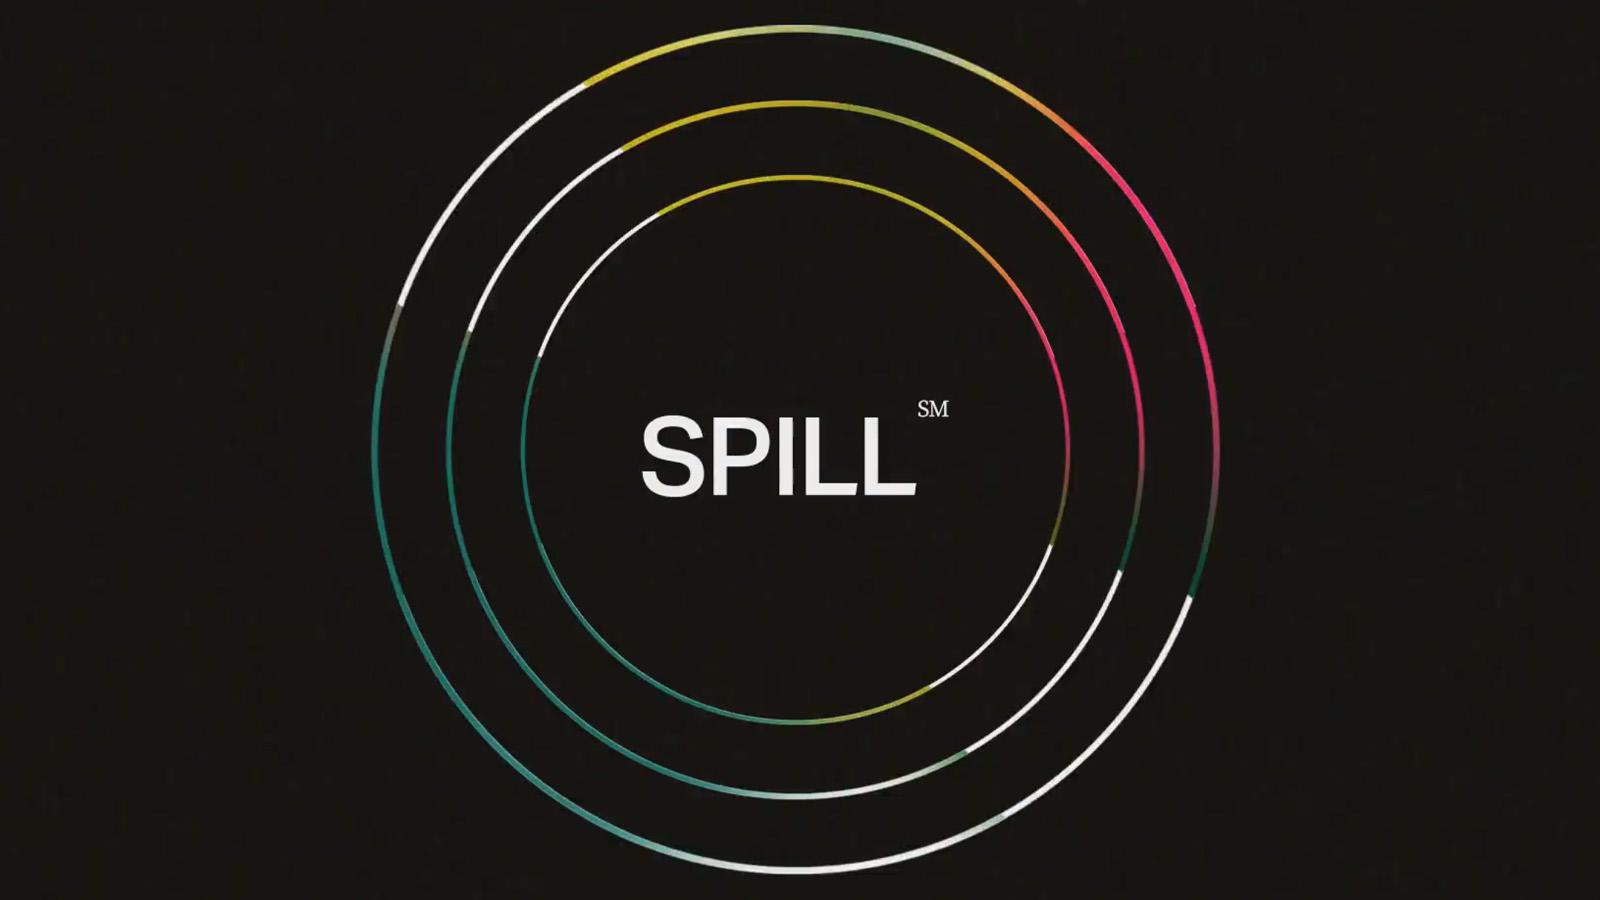 Spill, a new social platform made by former Twitter employees